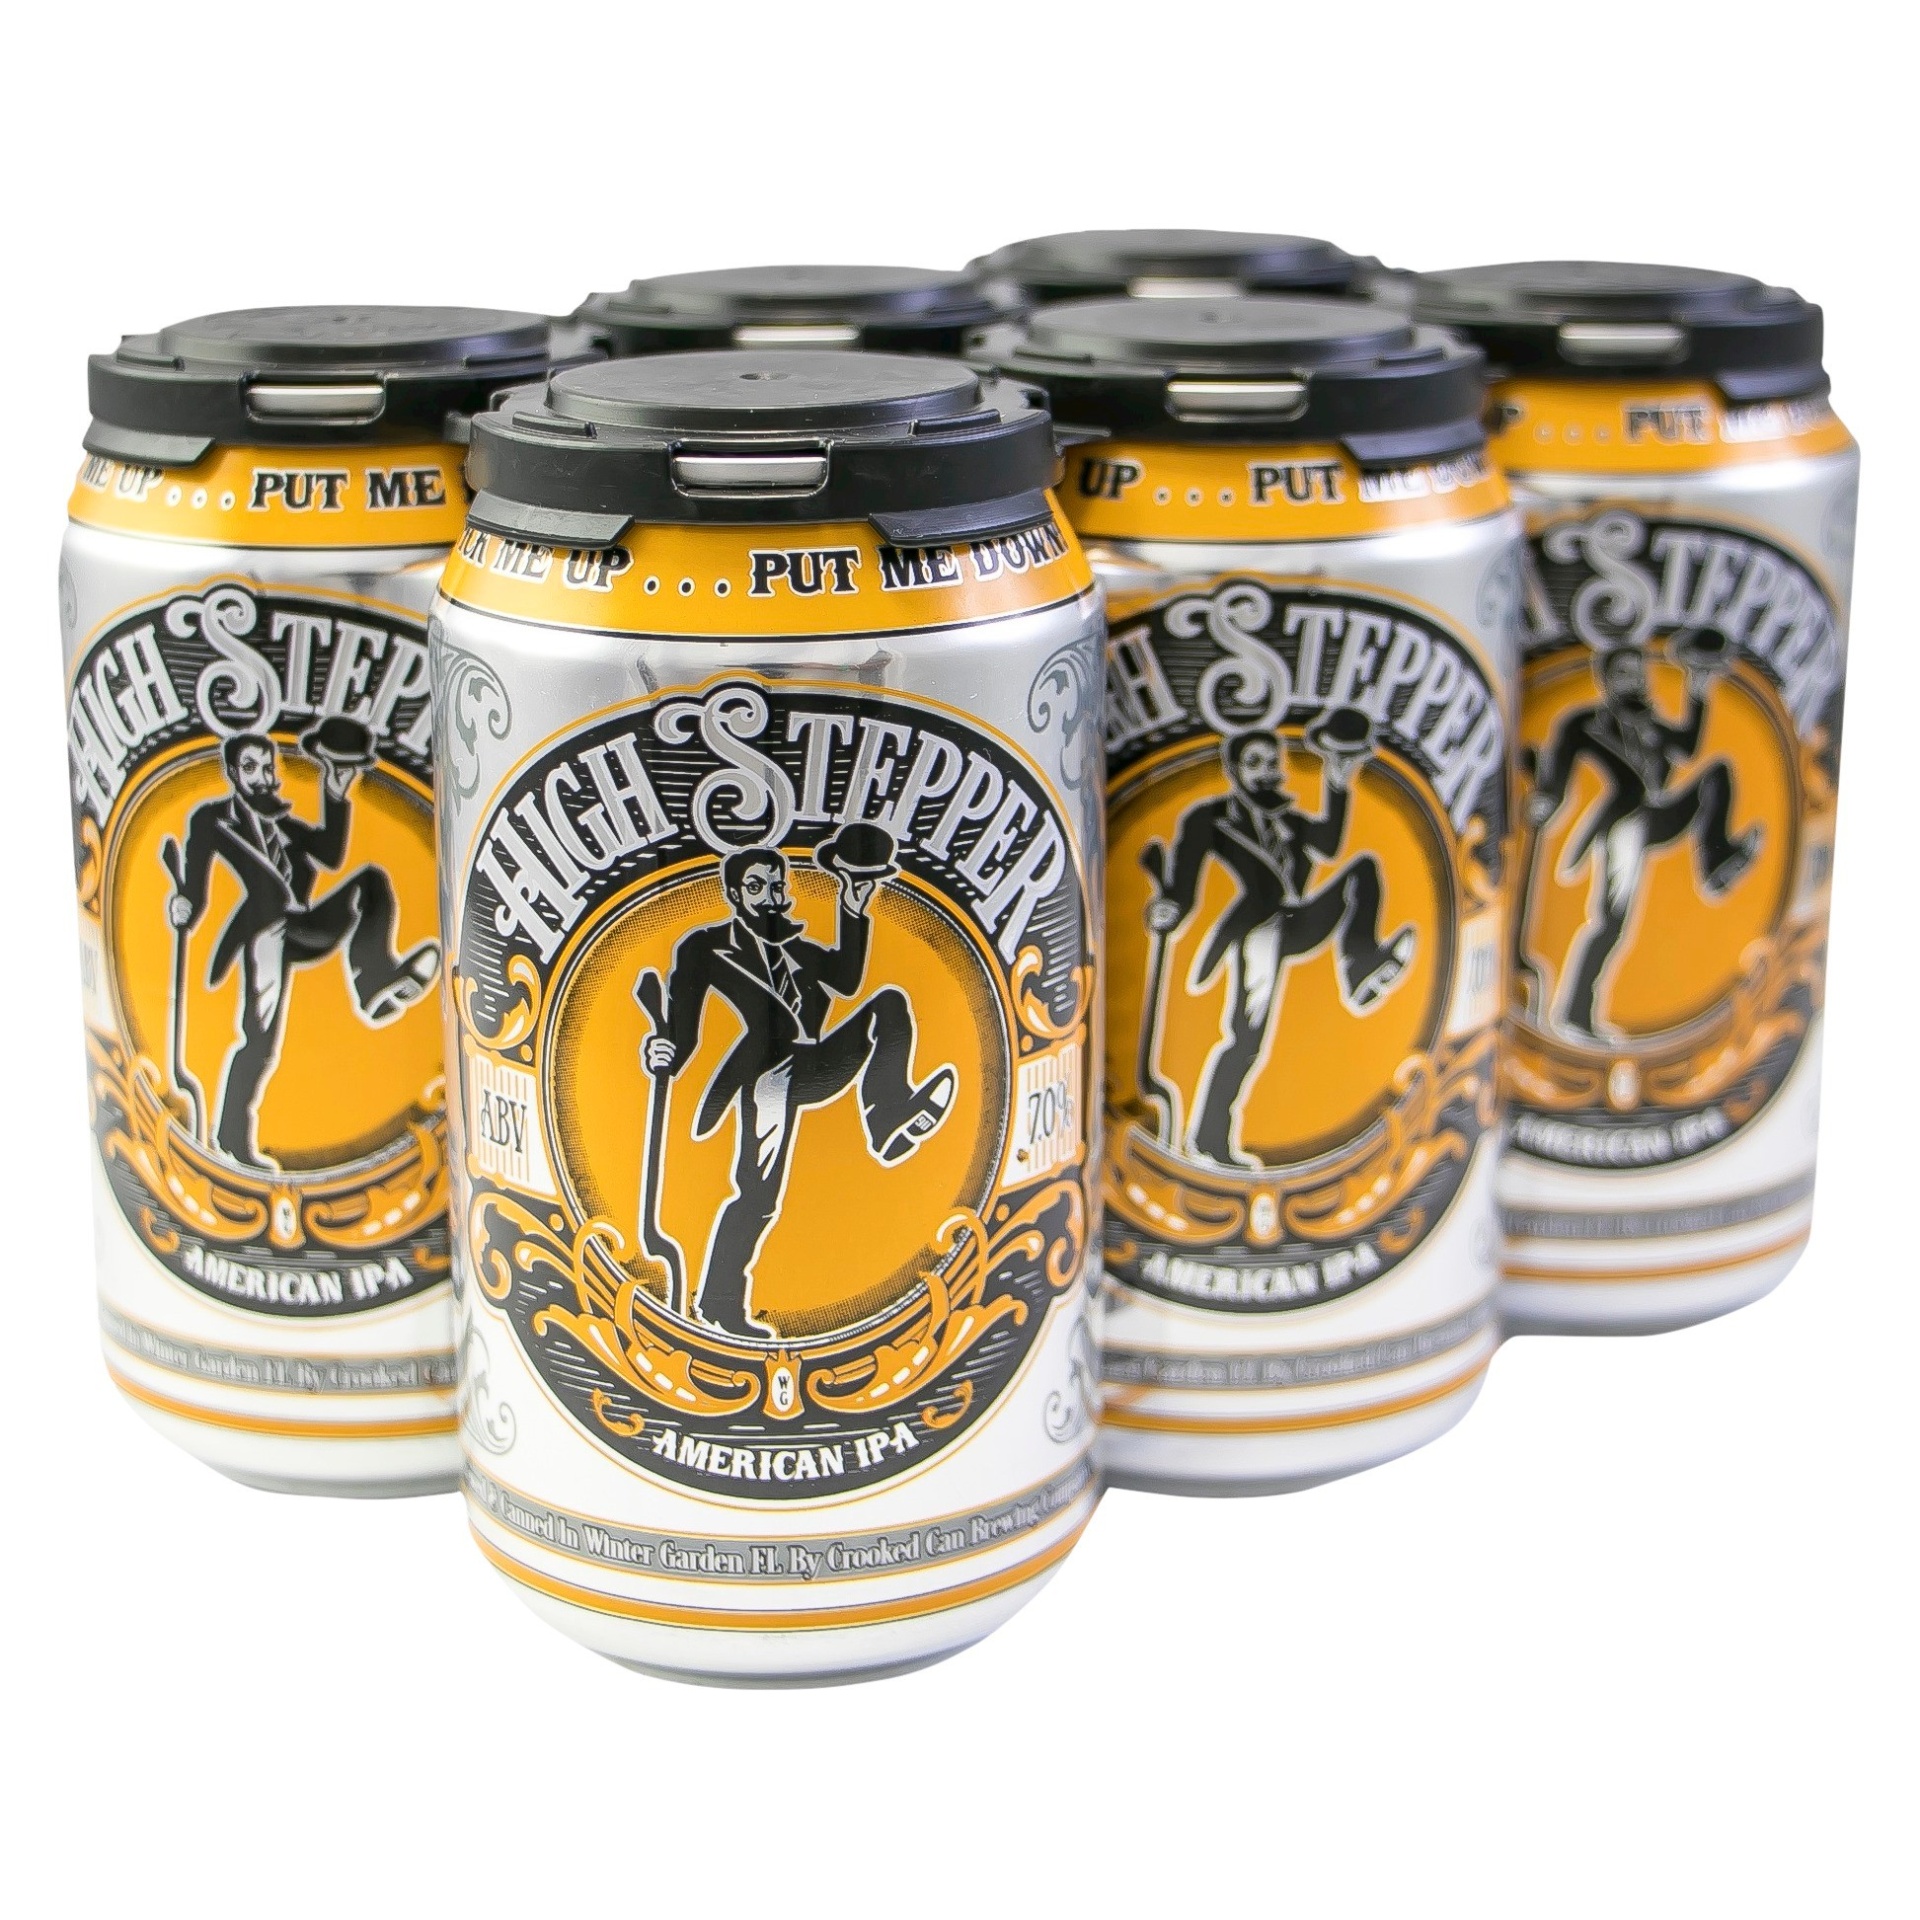 slide 1 of 2, Crooked Can Brewing Company Crooked Can High Stepper IPA Beer - 6pk/12 fl oz Cans, 6 ct; 12 fl oz